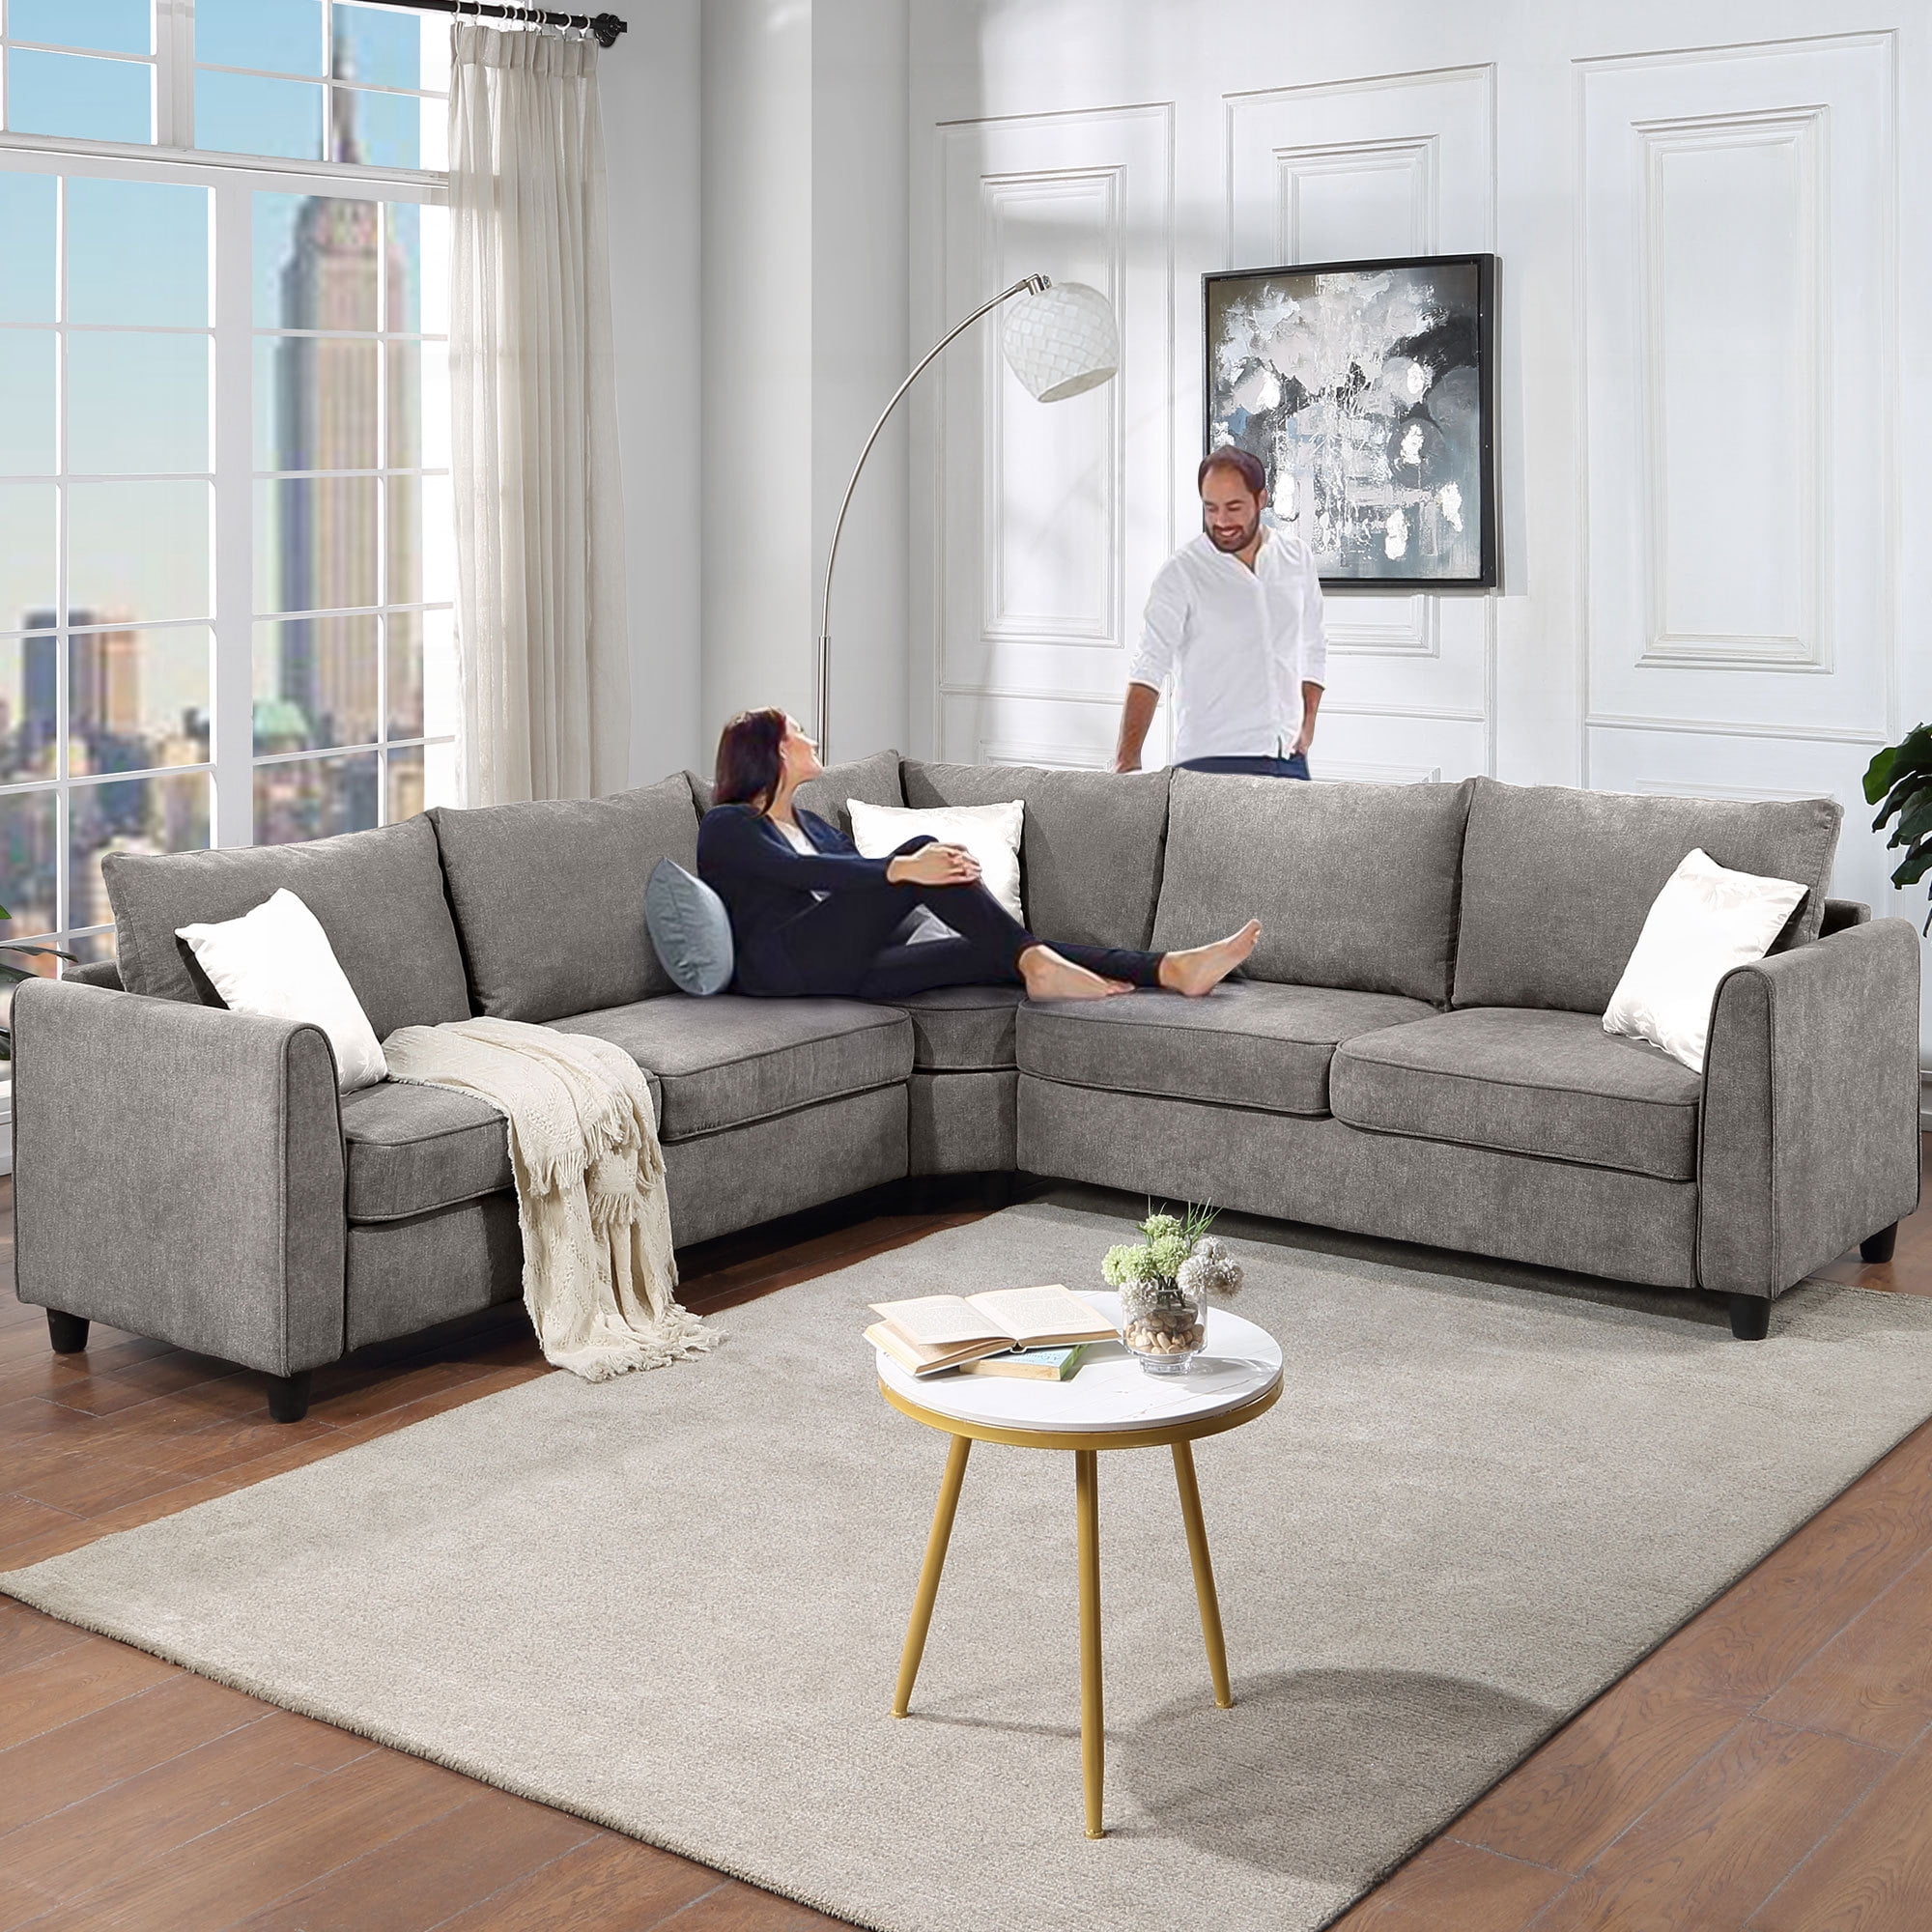 Sectioanl Sofa Couch Living Room Furniture Set L Shape Sectioanl Couch For Living Room Clearance Upholstered Fabric Sofas Couch With 3 Pillows For Living Room Bedroom Gray Walmart Com Walmart Com